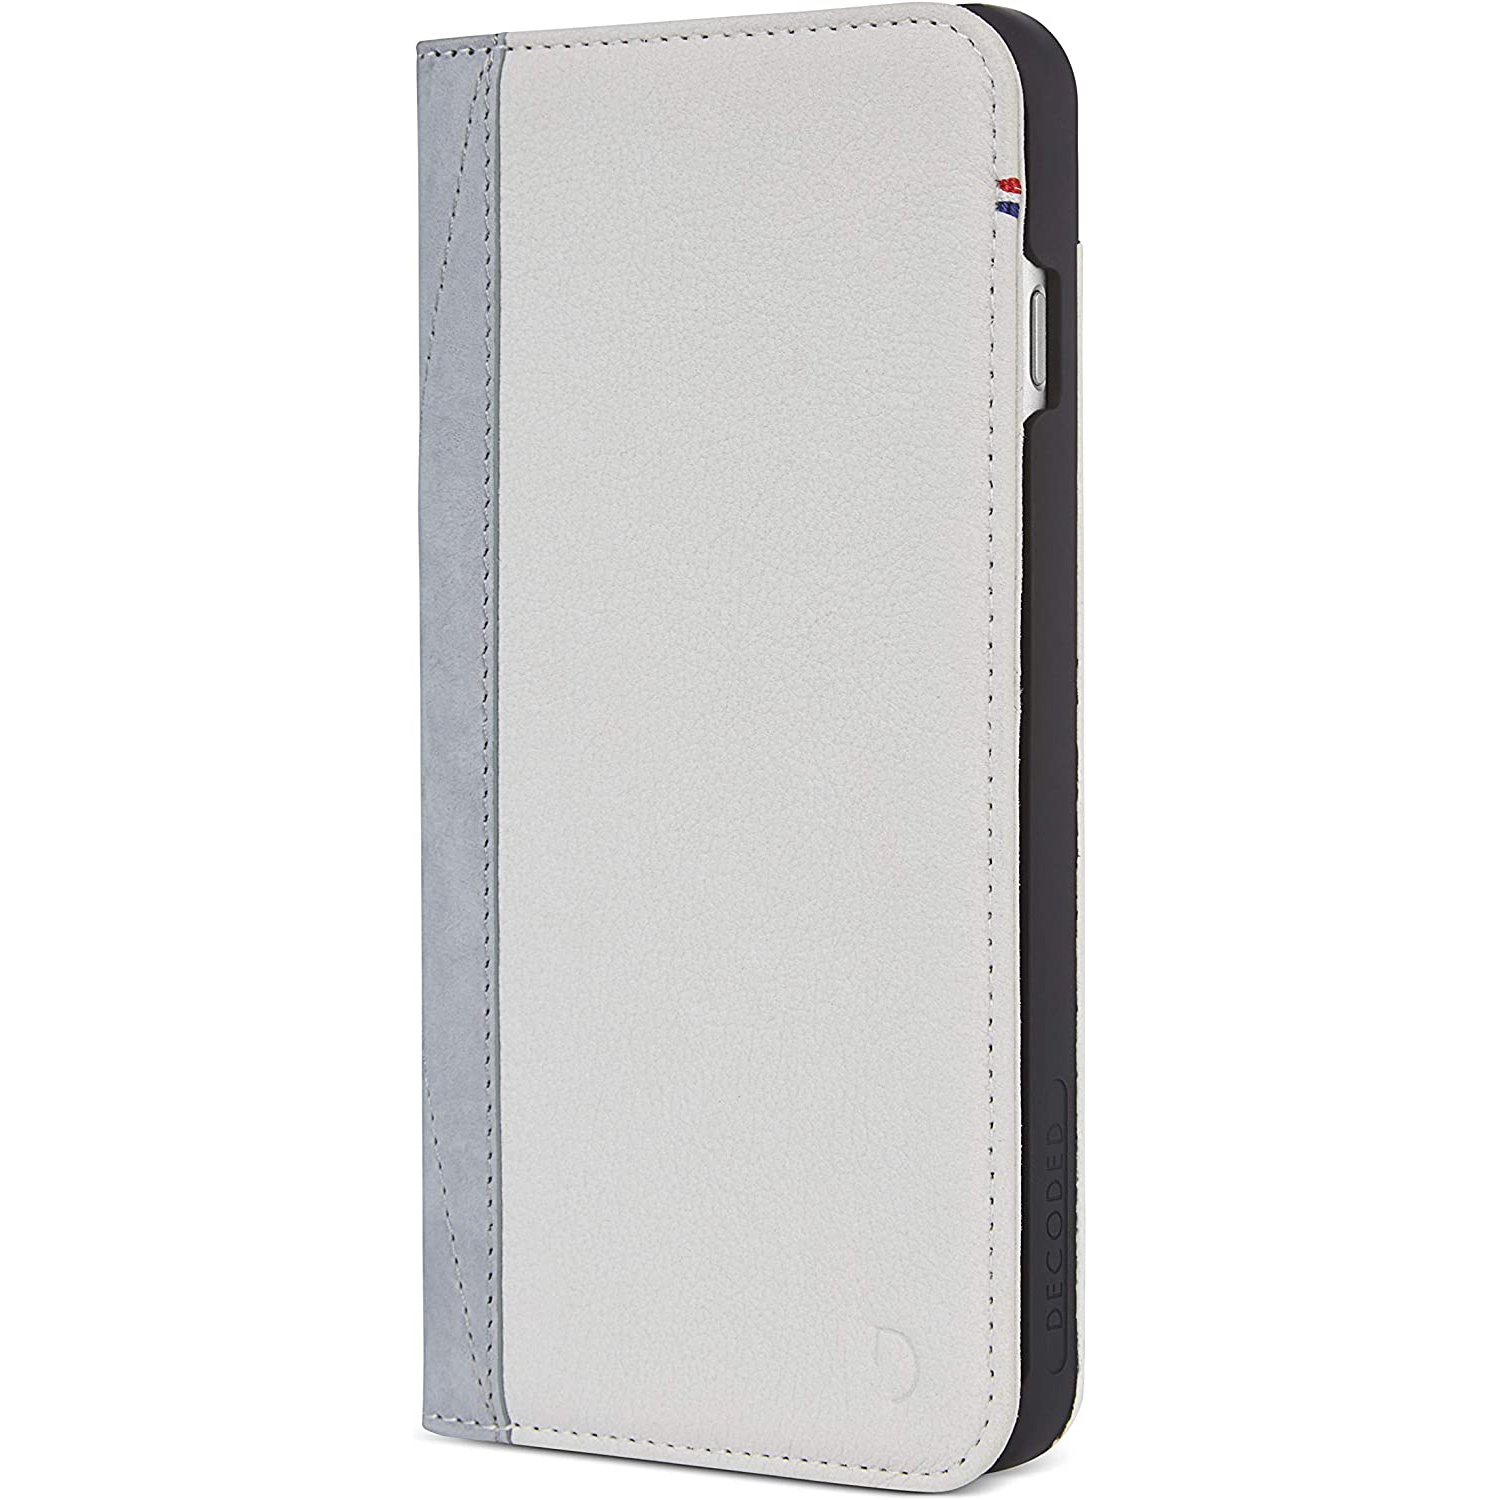 Decoded Leather Wallet Case for iPhone 8/7/6s/6 Plus - White/Grey